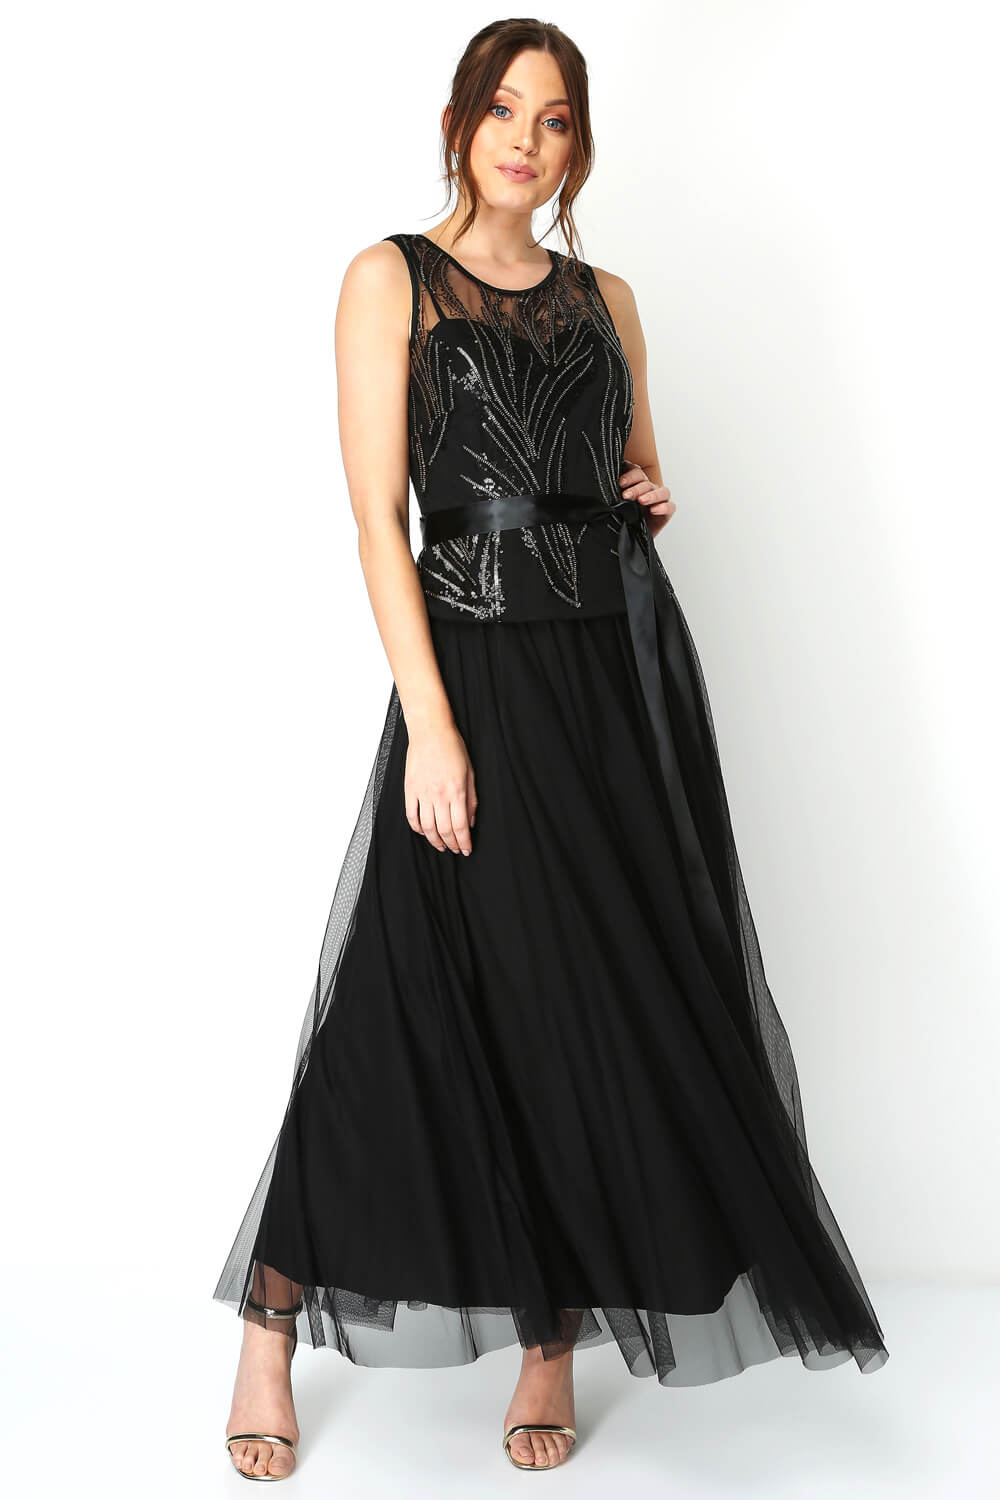 Black Sequin Tulle Maxi Dress, Image 2 of 5